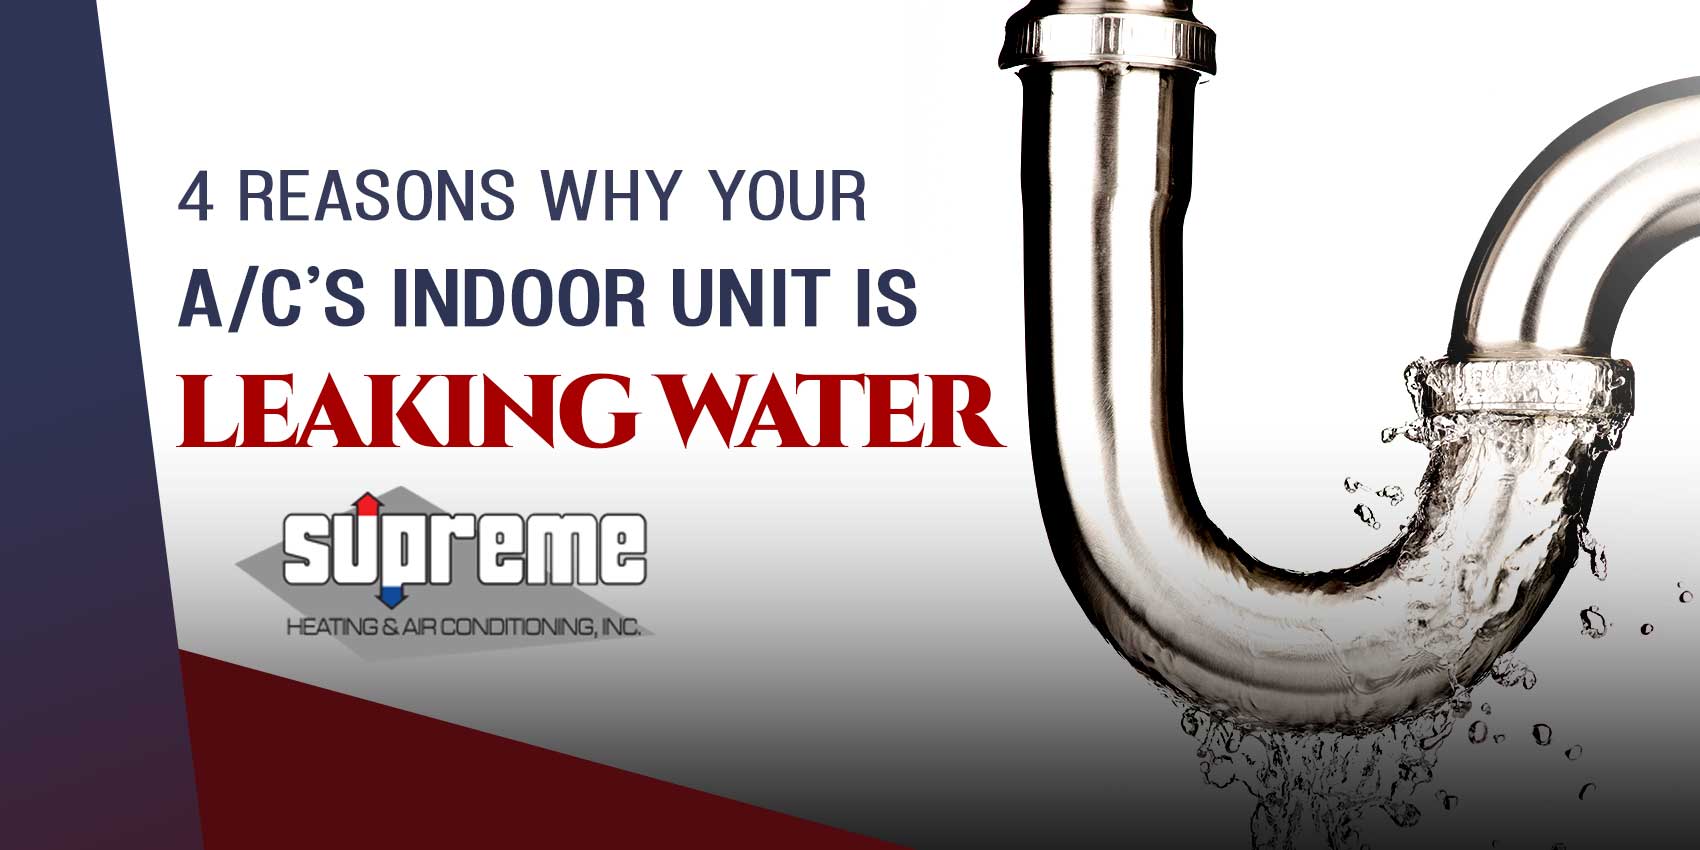 4 Reasons Why Your A/C’s Indoor Unit is Leaking Water